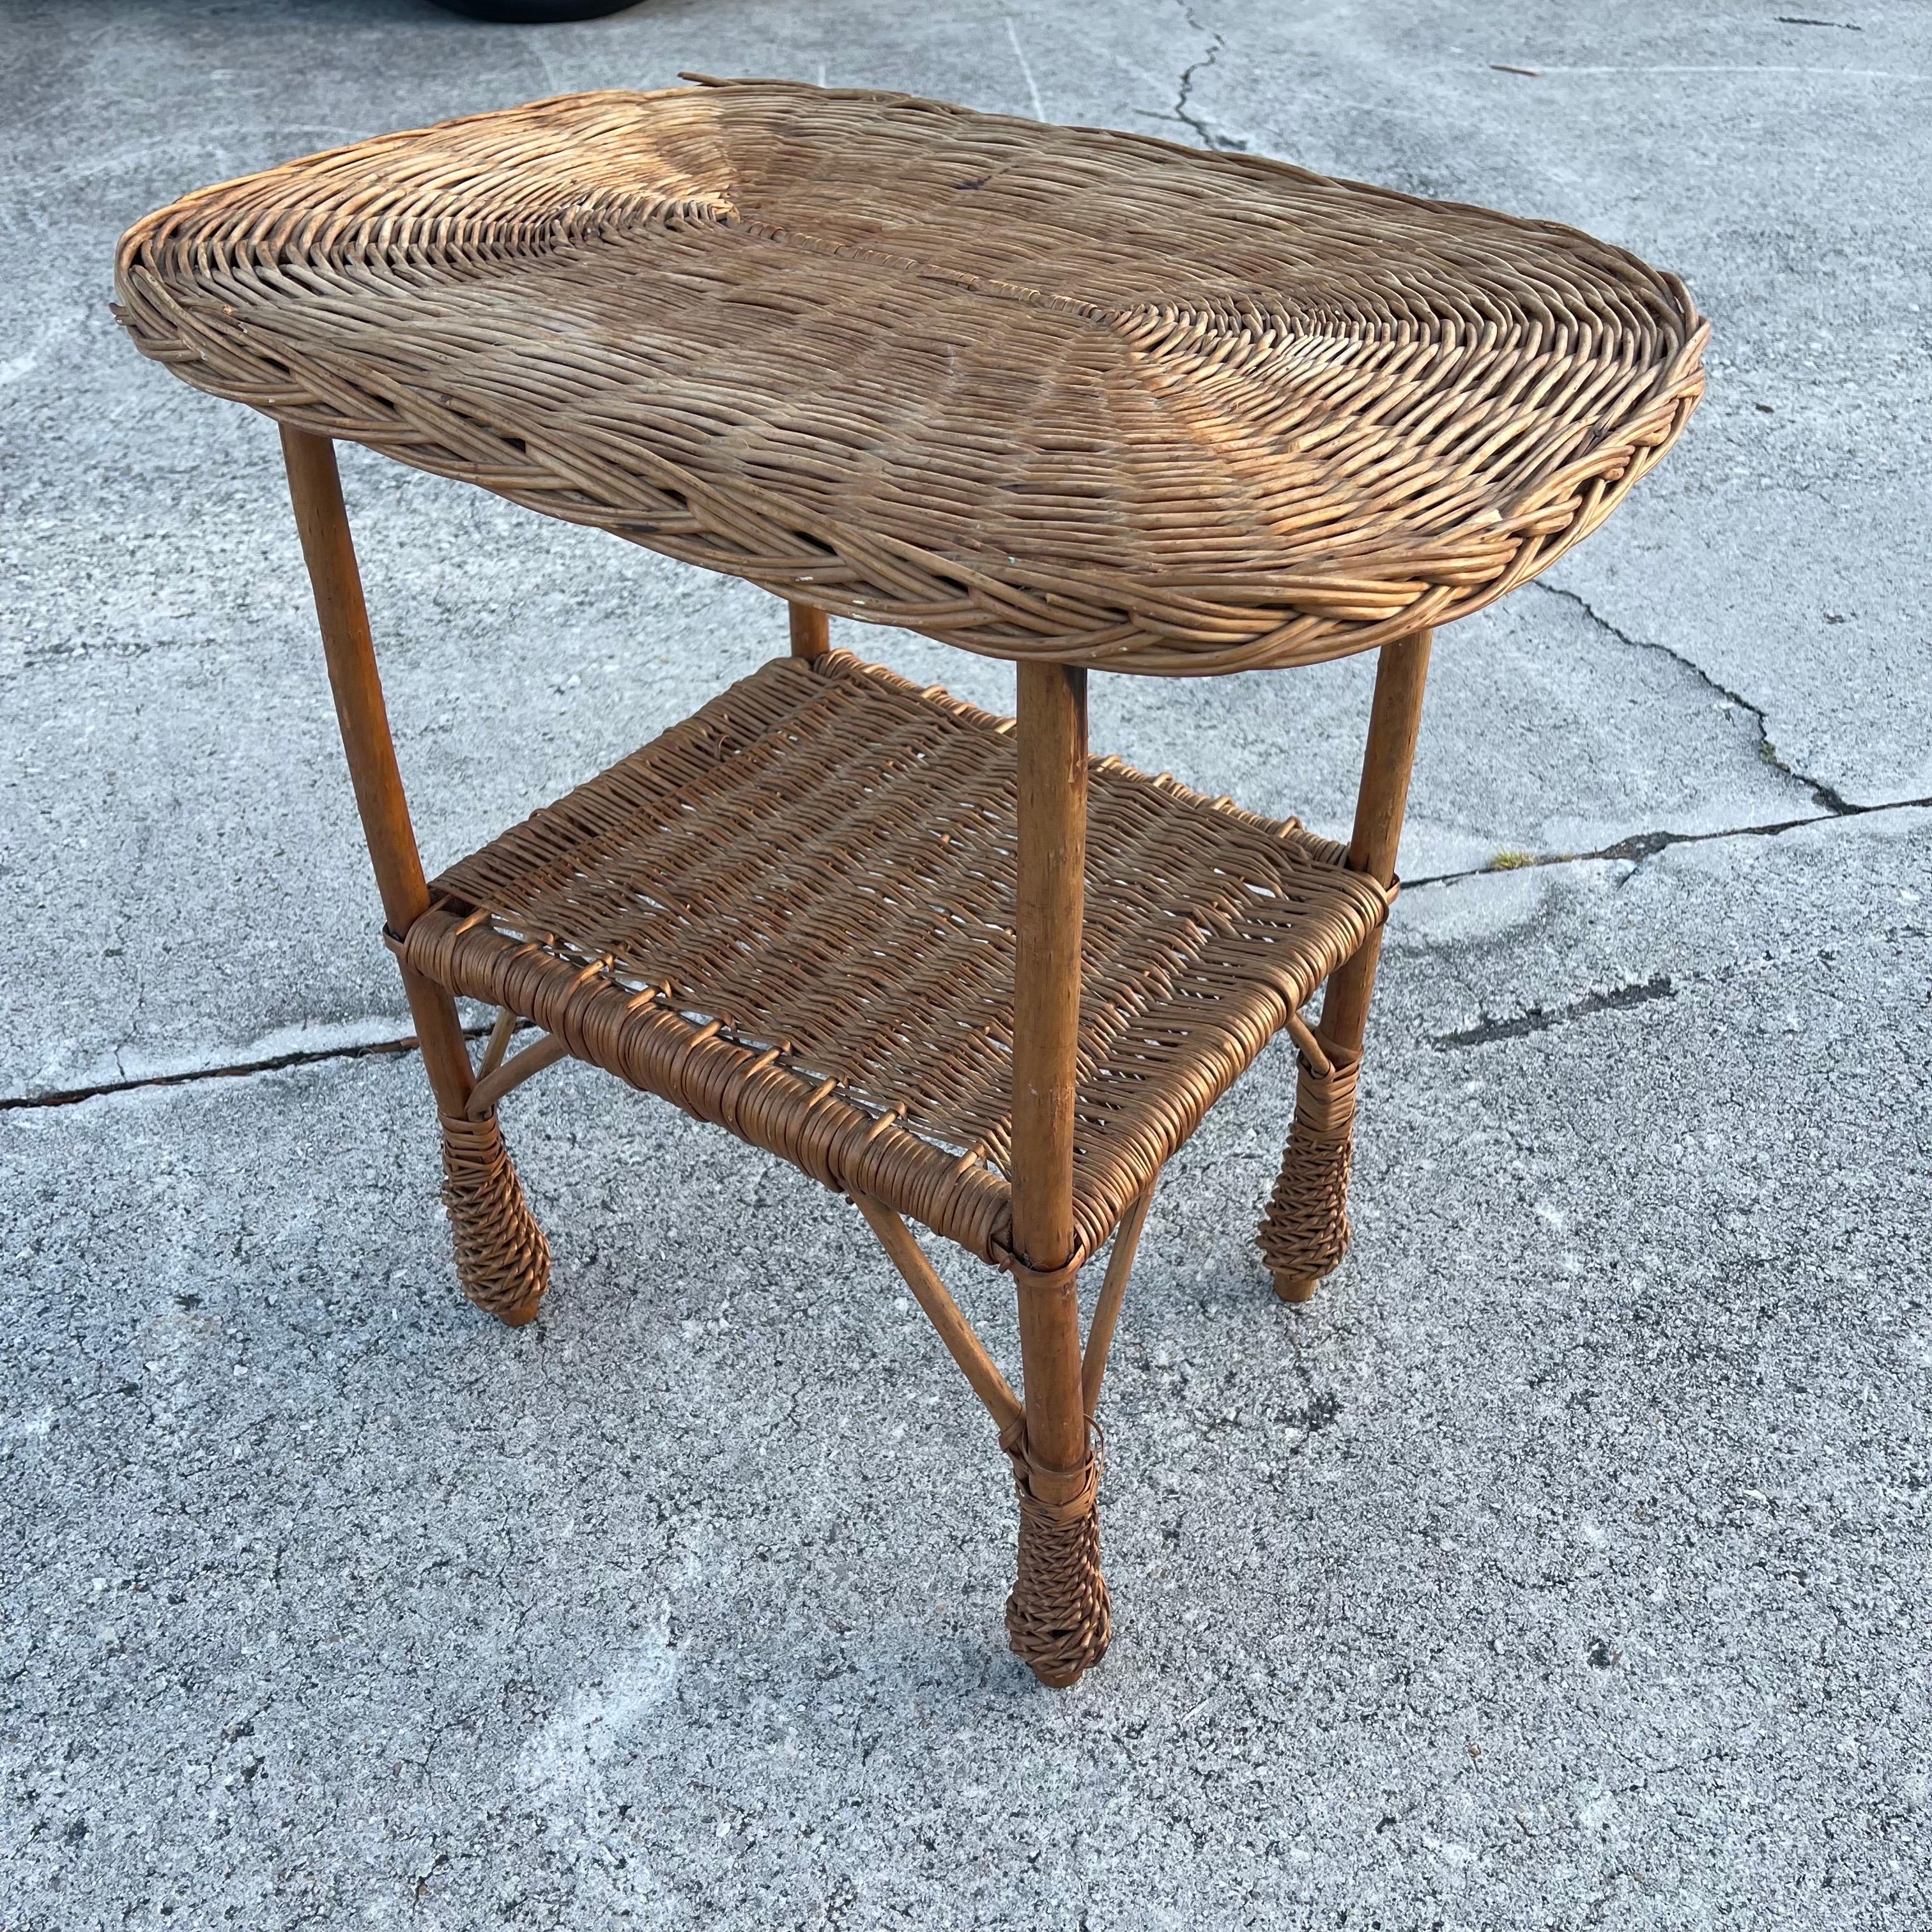 Mid-20th Century Woven Wicker Rattan Side Table For Sale 2